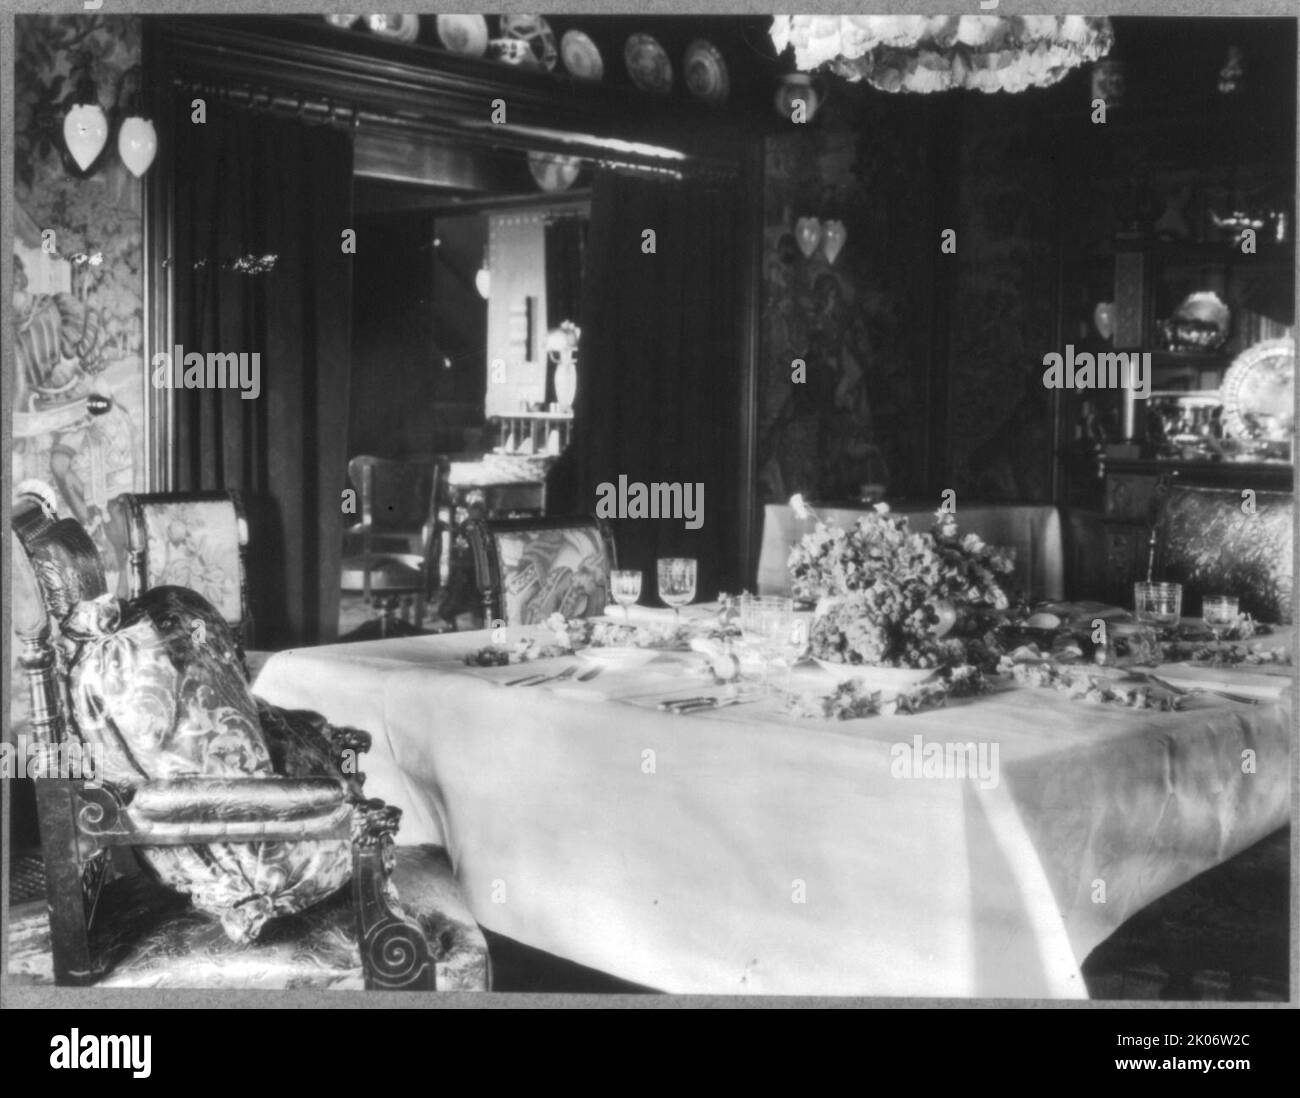 Mrs. Phoebe Apperson Hearst's home, Pleasanton, Cal.: dining room with table setting for four, 1920s. Stock Photo